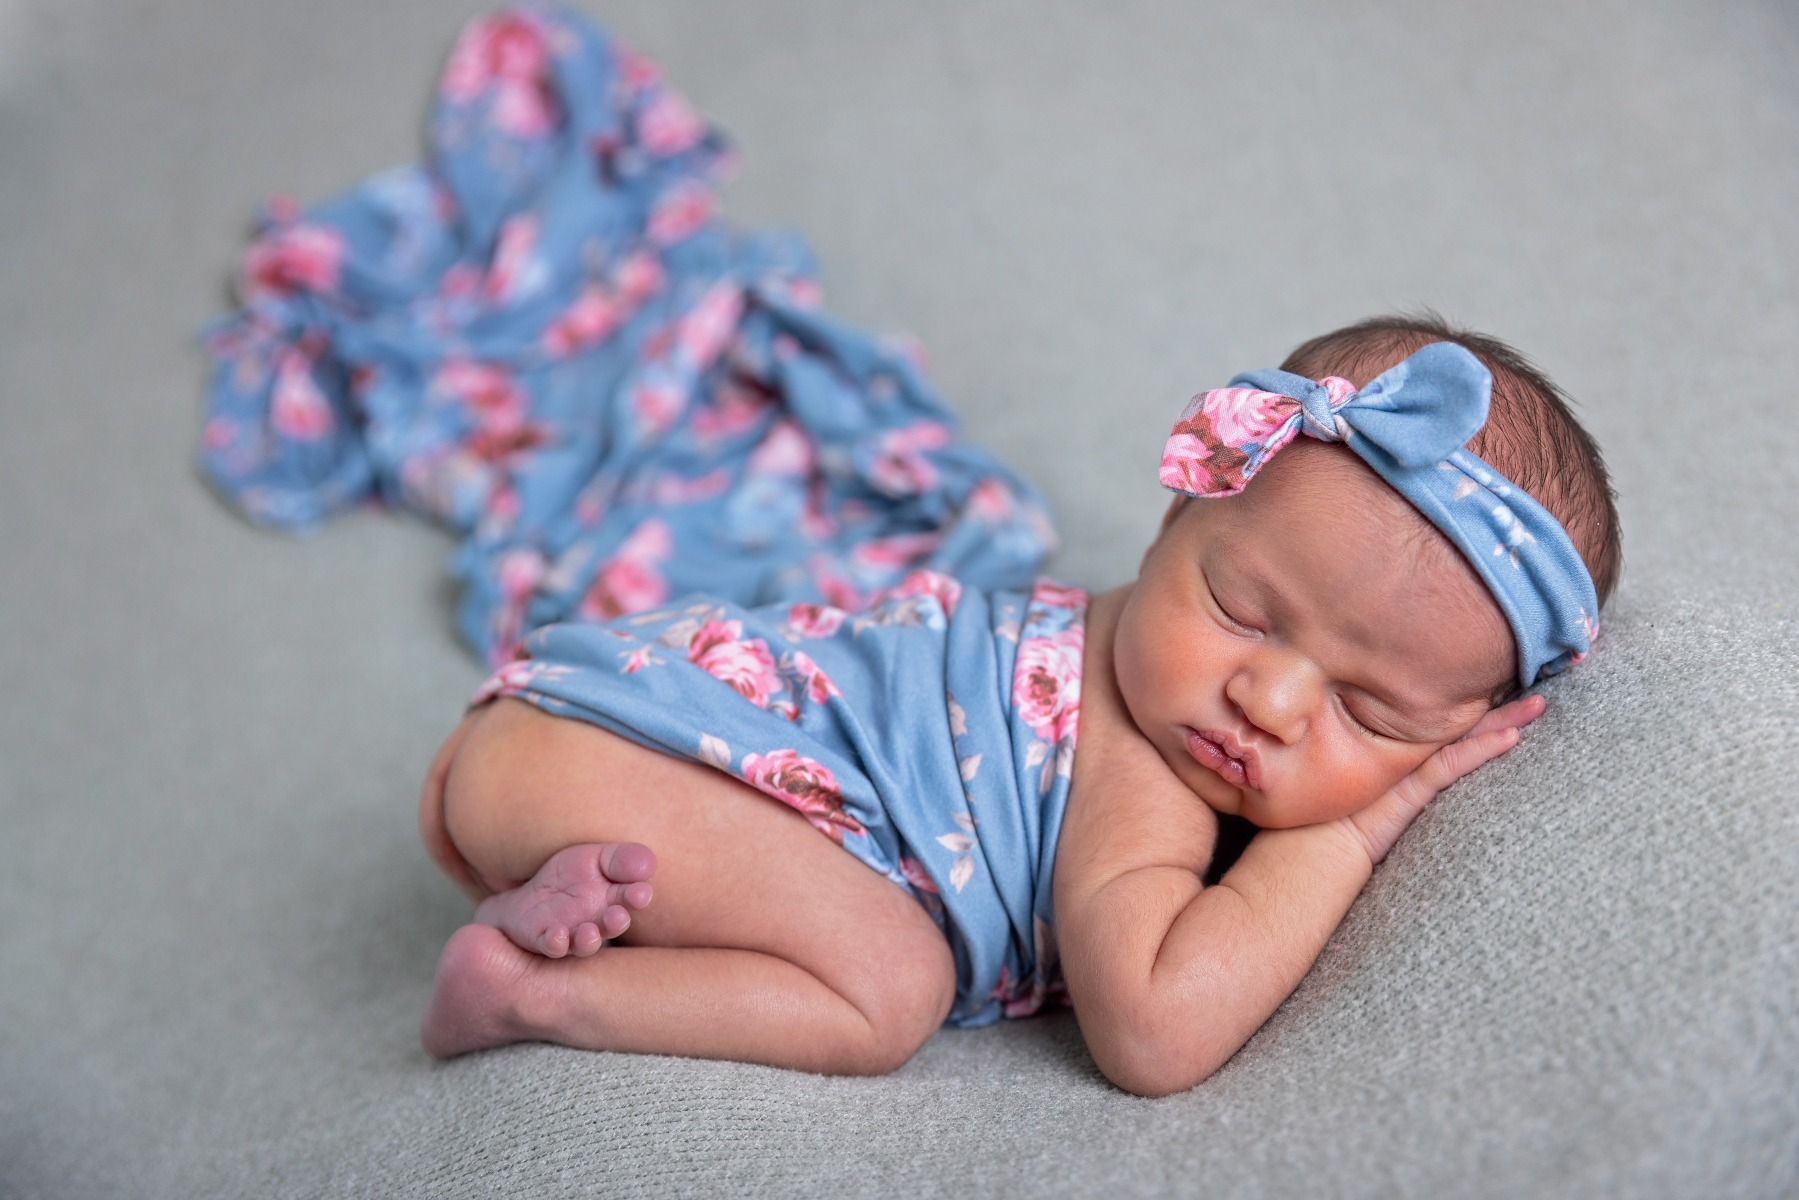 newborn sleeping on her belly with a blue & pink swaddle and headband